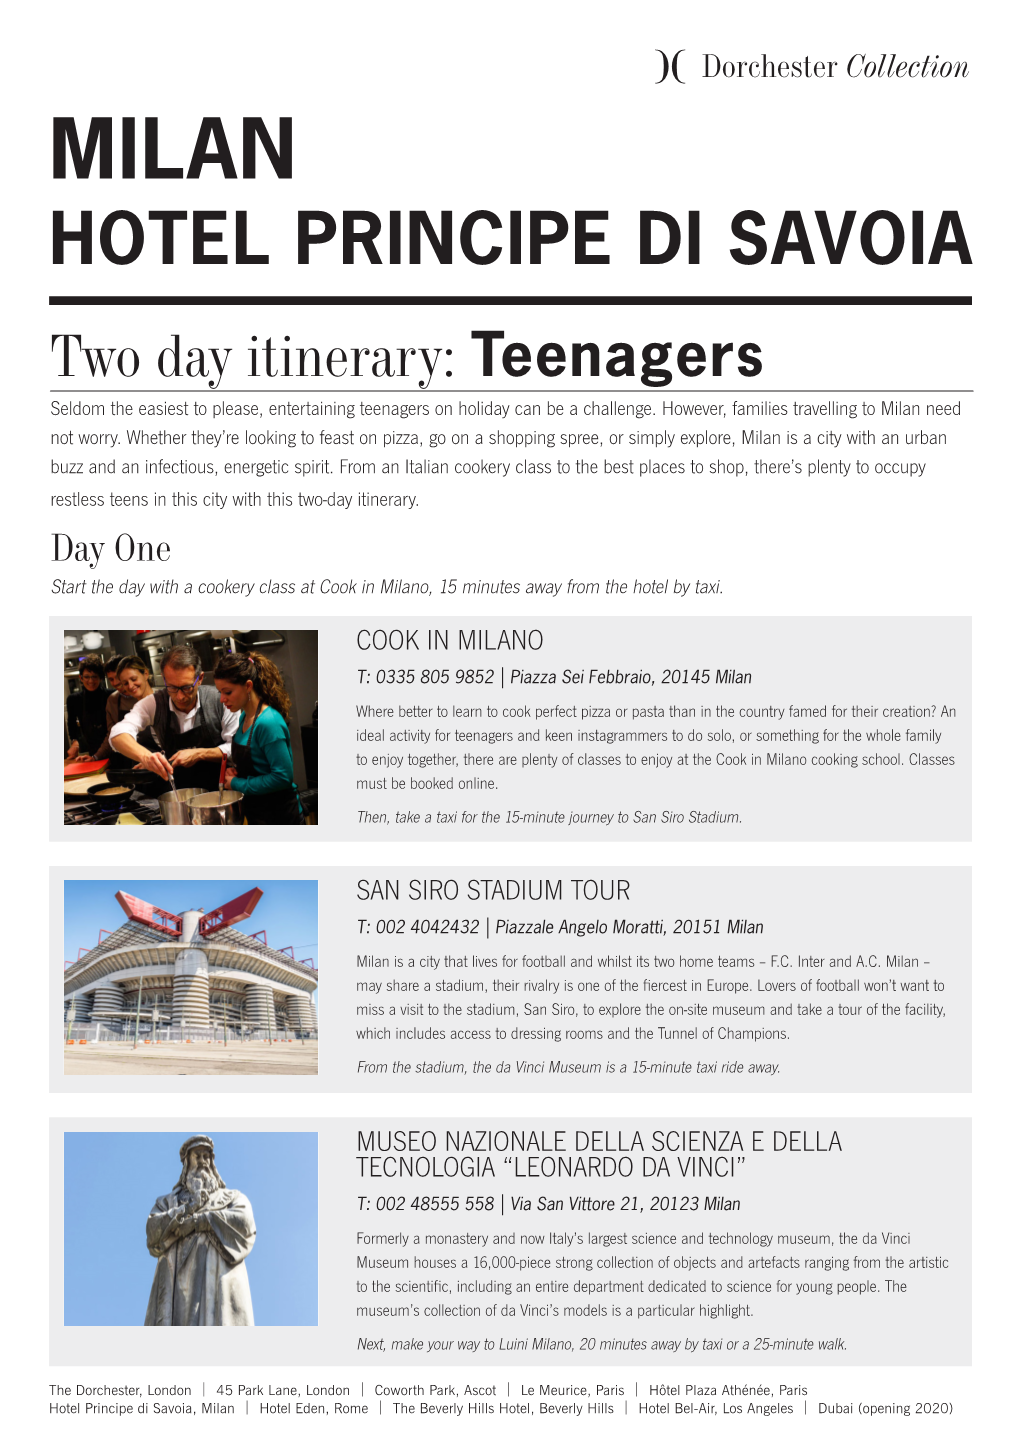 MILAN HOTEL PRINCIPE DI SAVOIA Two Day Itinerary: Teenagers Seldom the Easiest to Please, Entertaining Teenagers on Holiday Can Be a Challenge